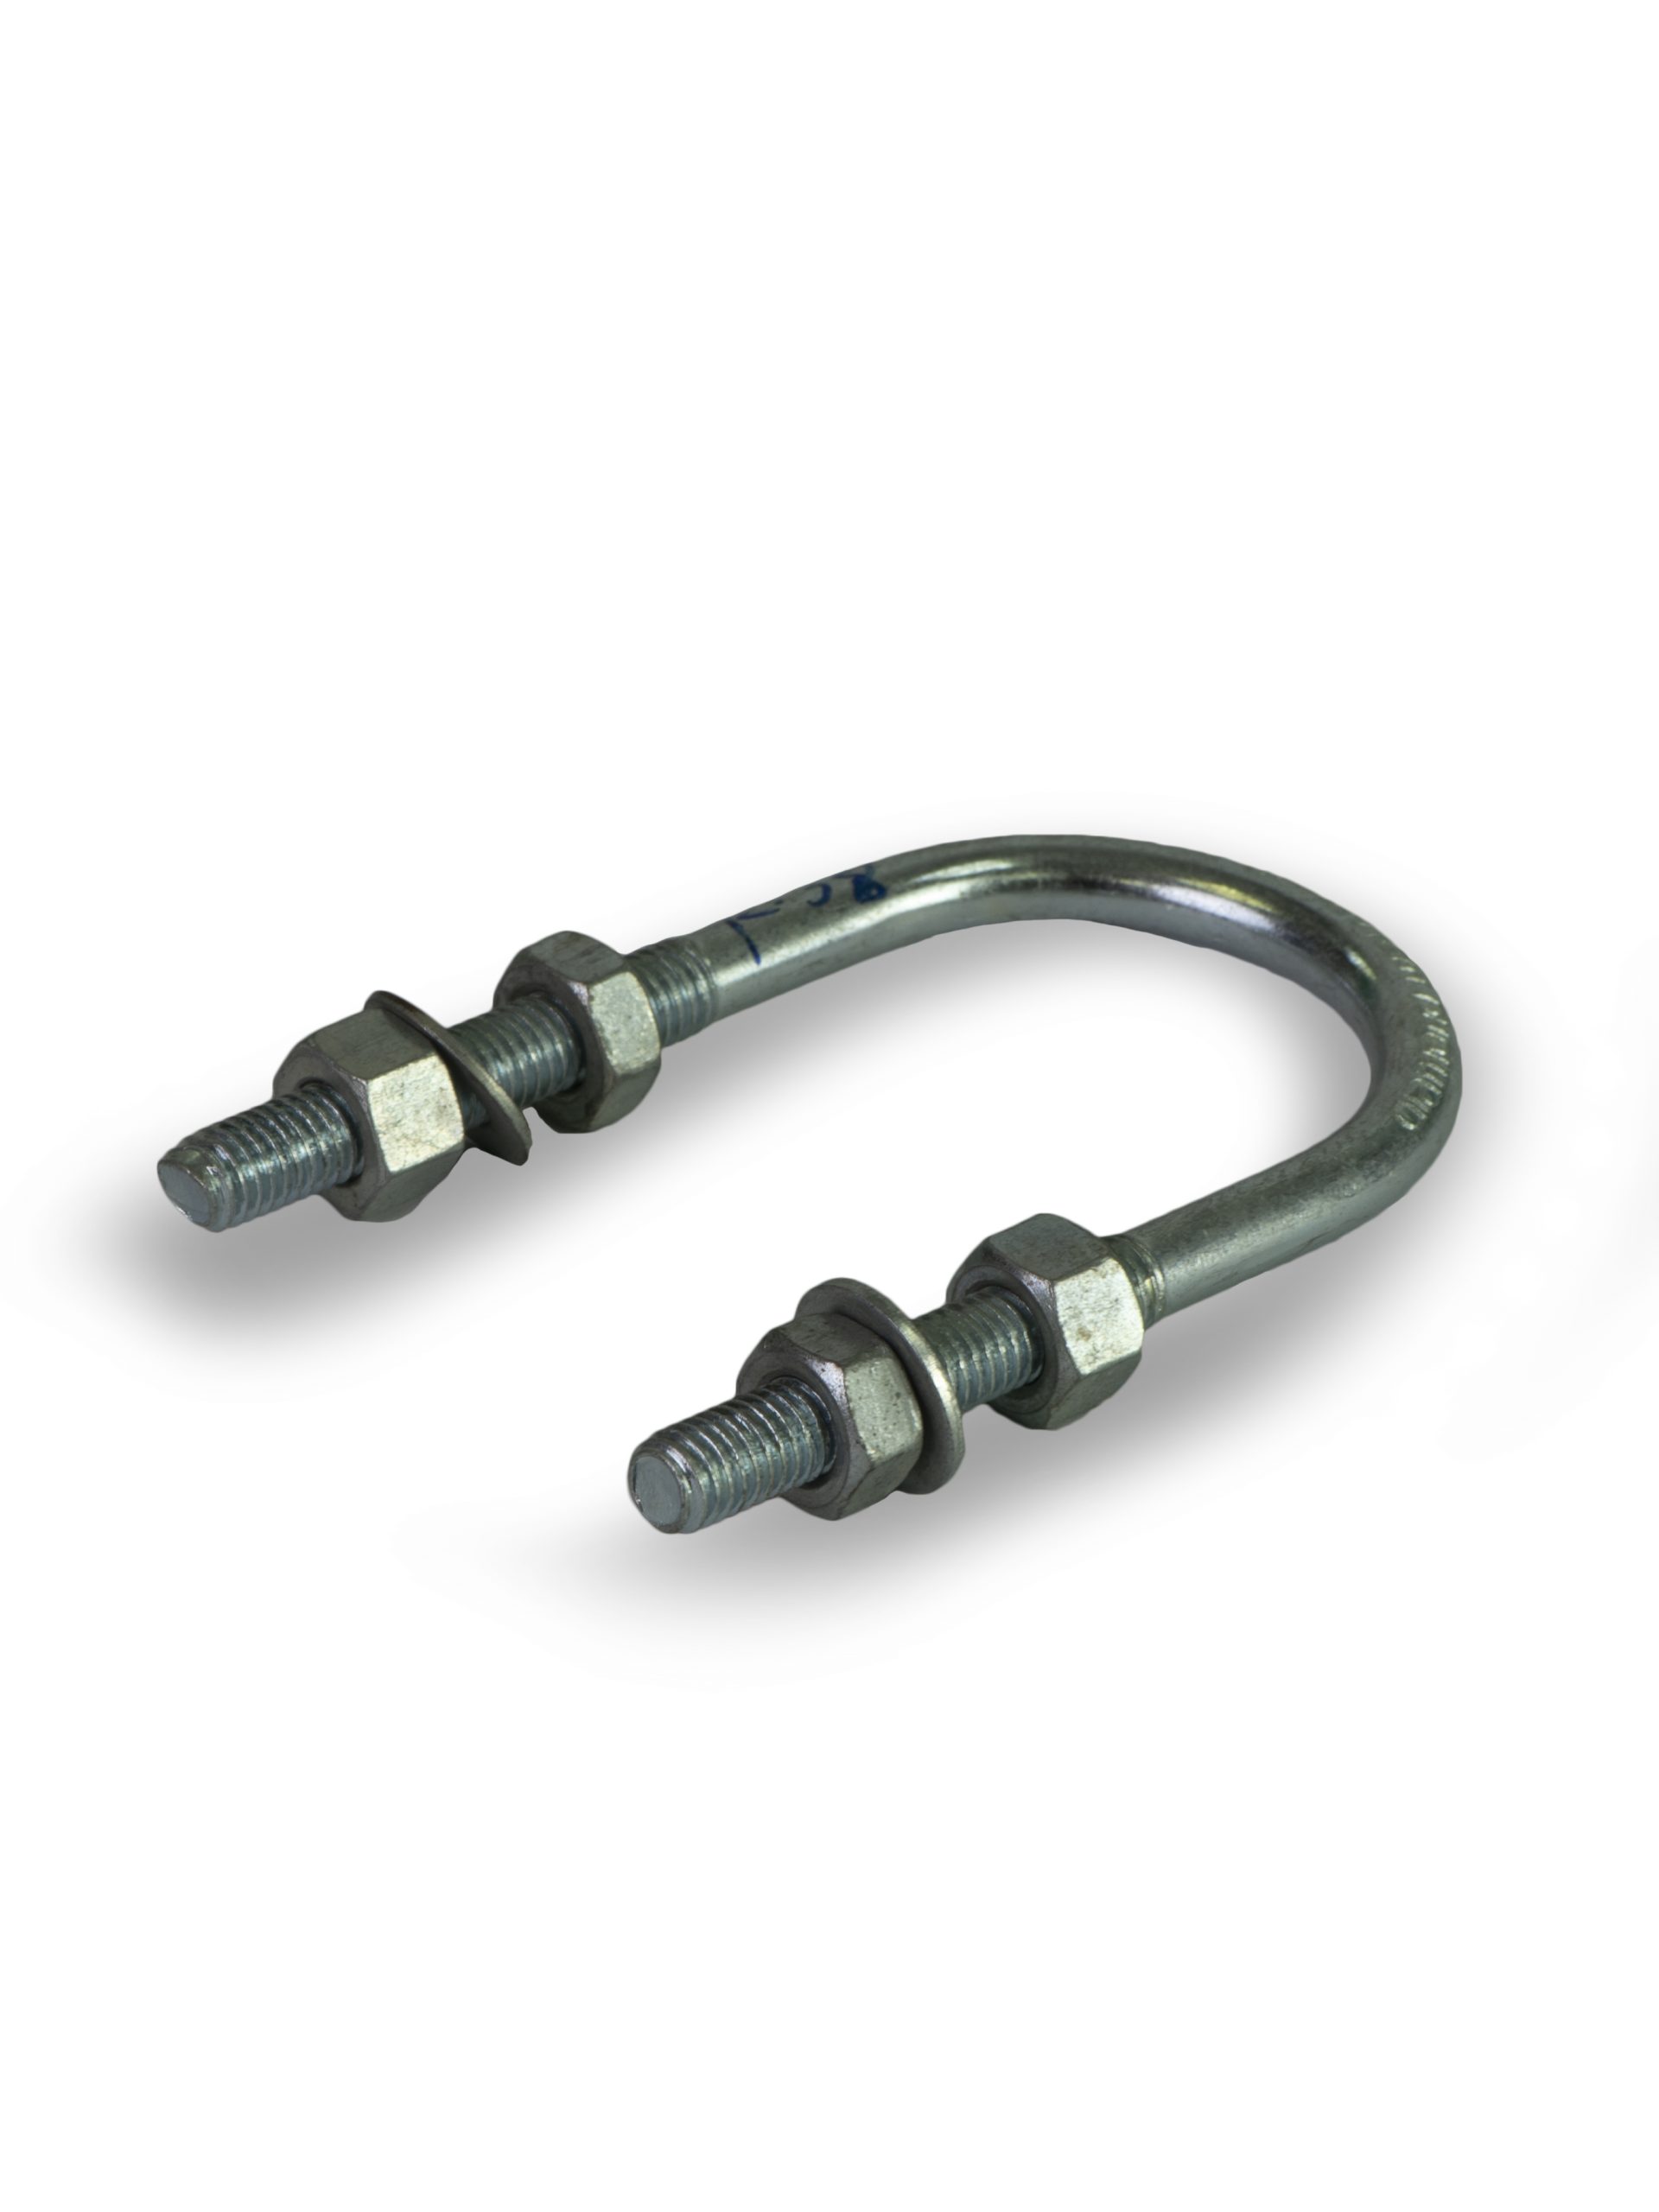 U CLAMP 1 Inches X 8 MM WITH NUTS AND WASHERS from Gas Equipment Company Llc Abu Dhabi, UNITED ARAB EMIRATES